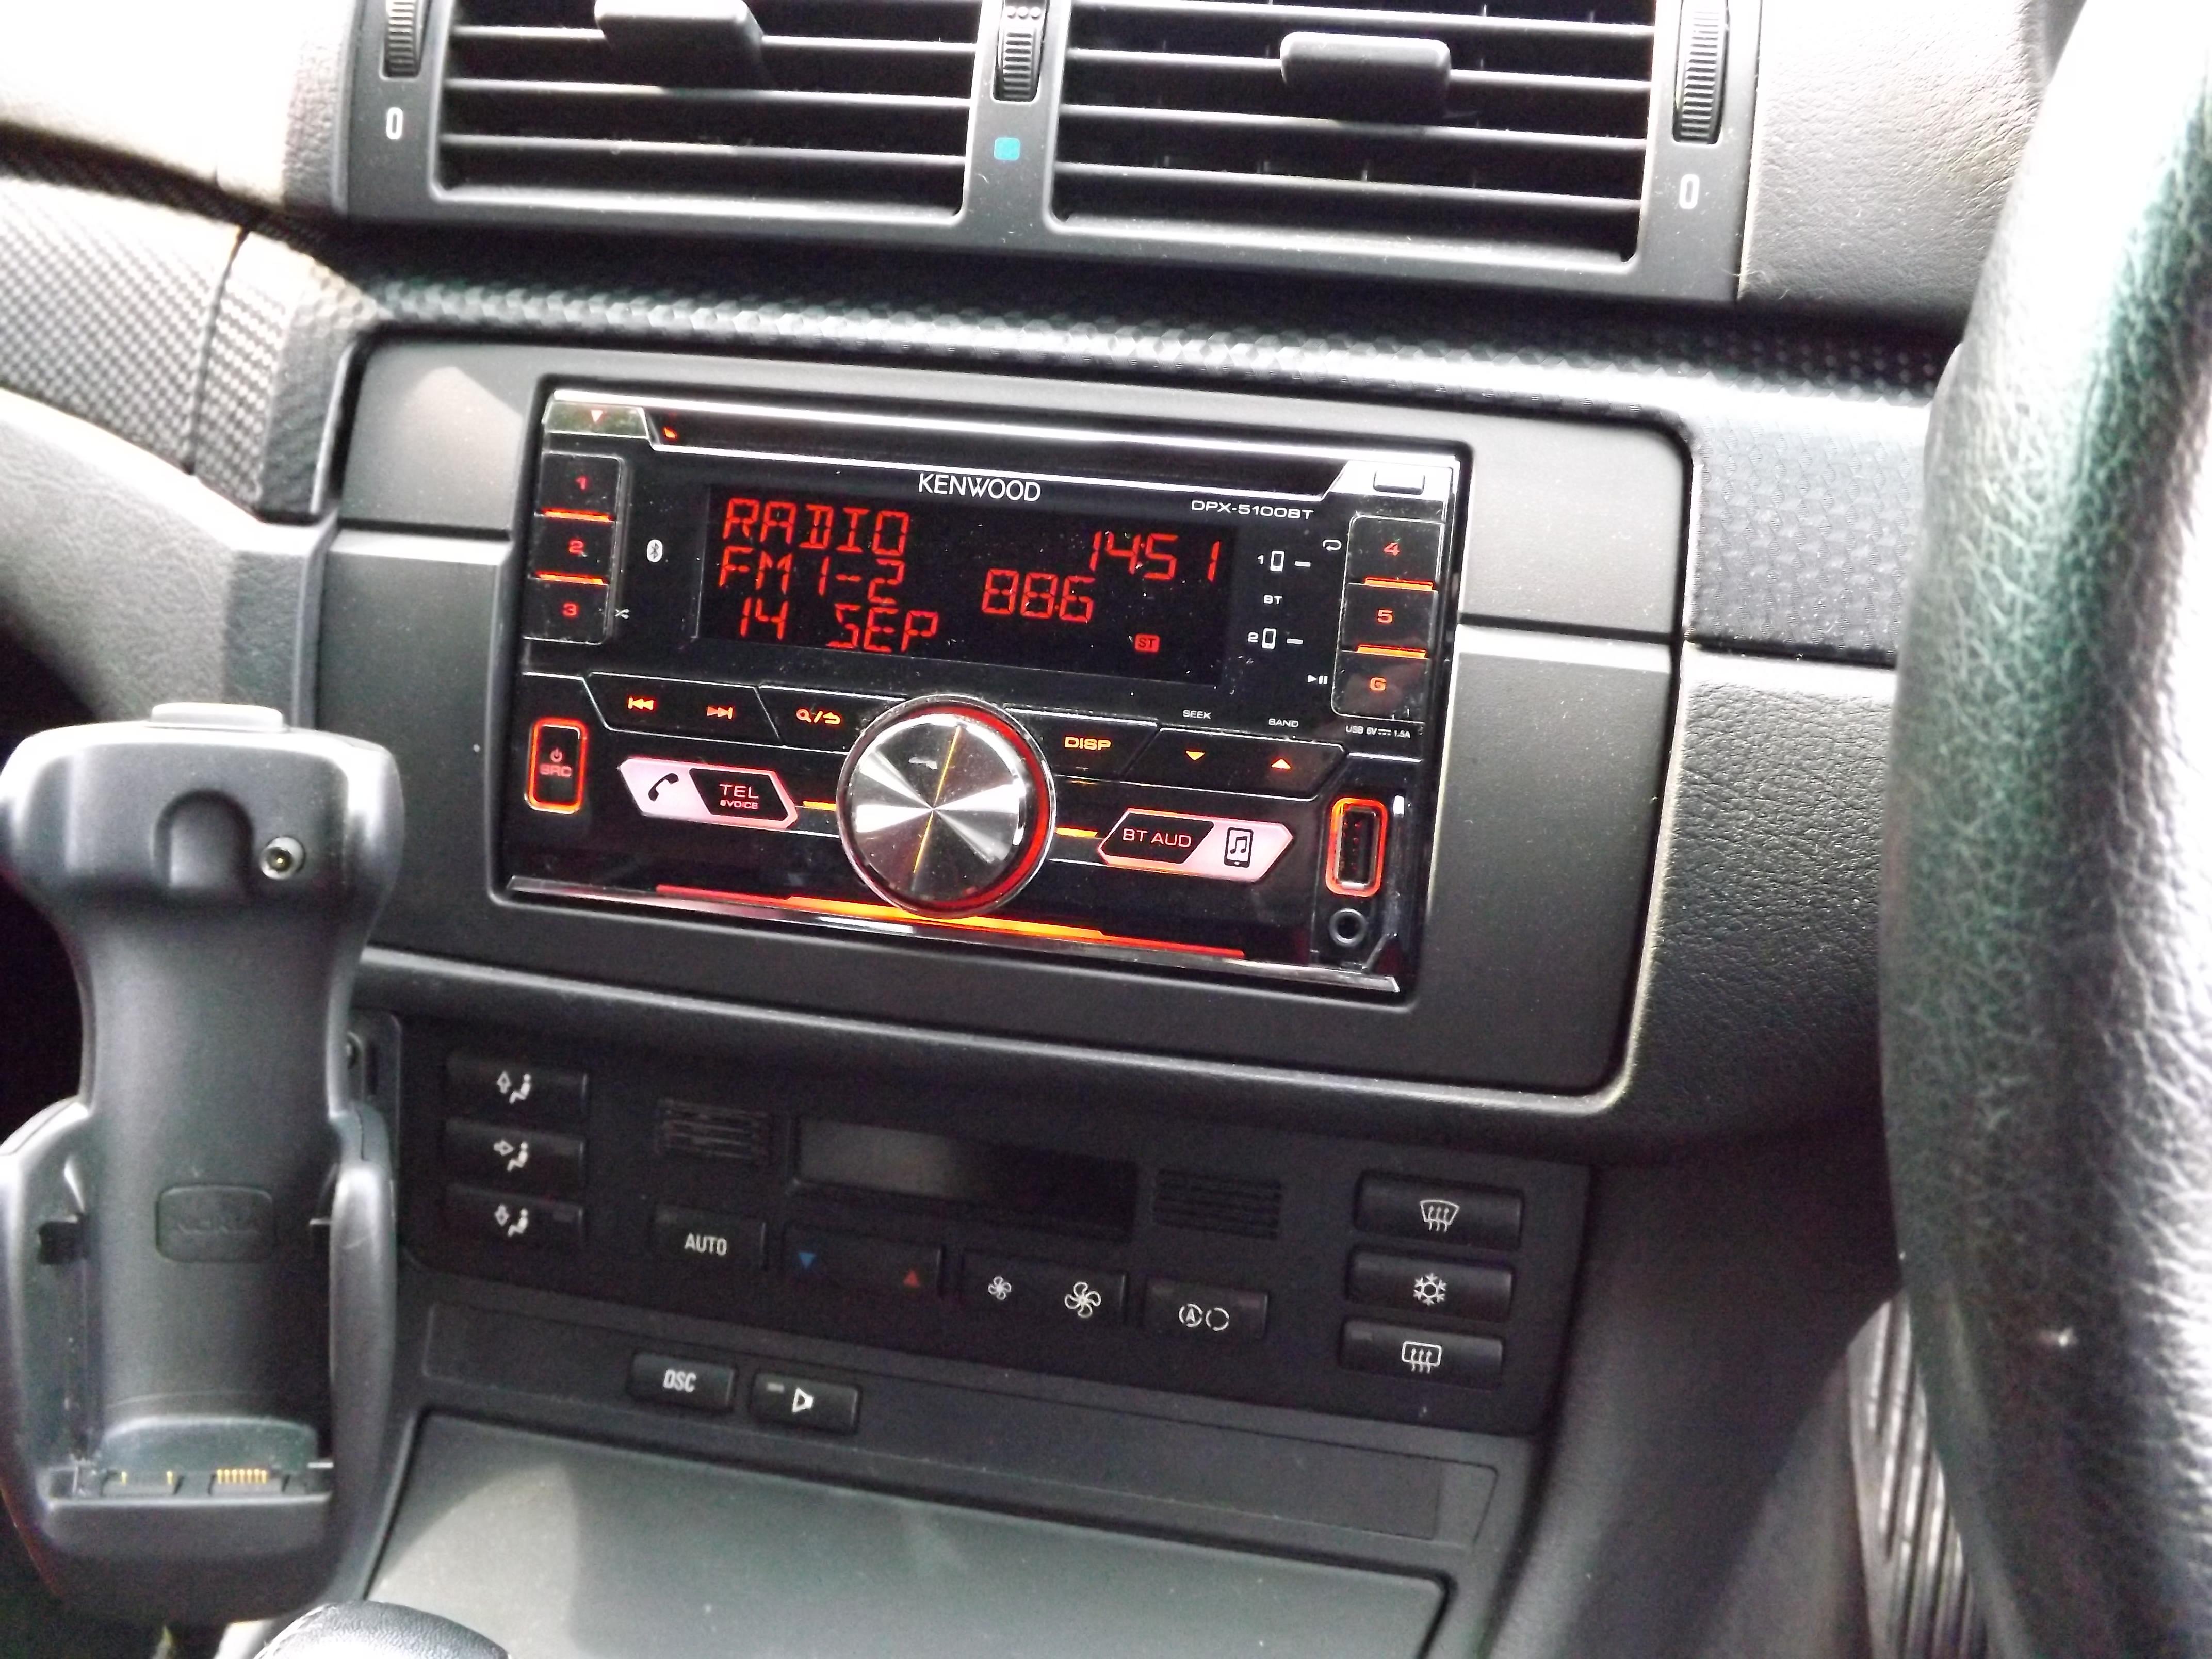 E46 330i Radio options !! - BMW 3 Series Forum - Bimmer Owners Club - BMW  Forum for BMW Owners